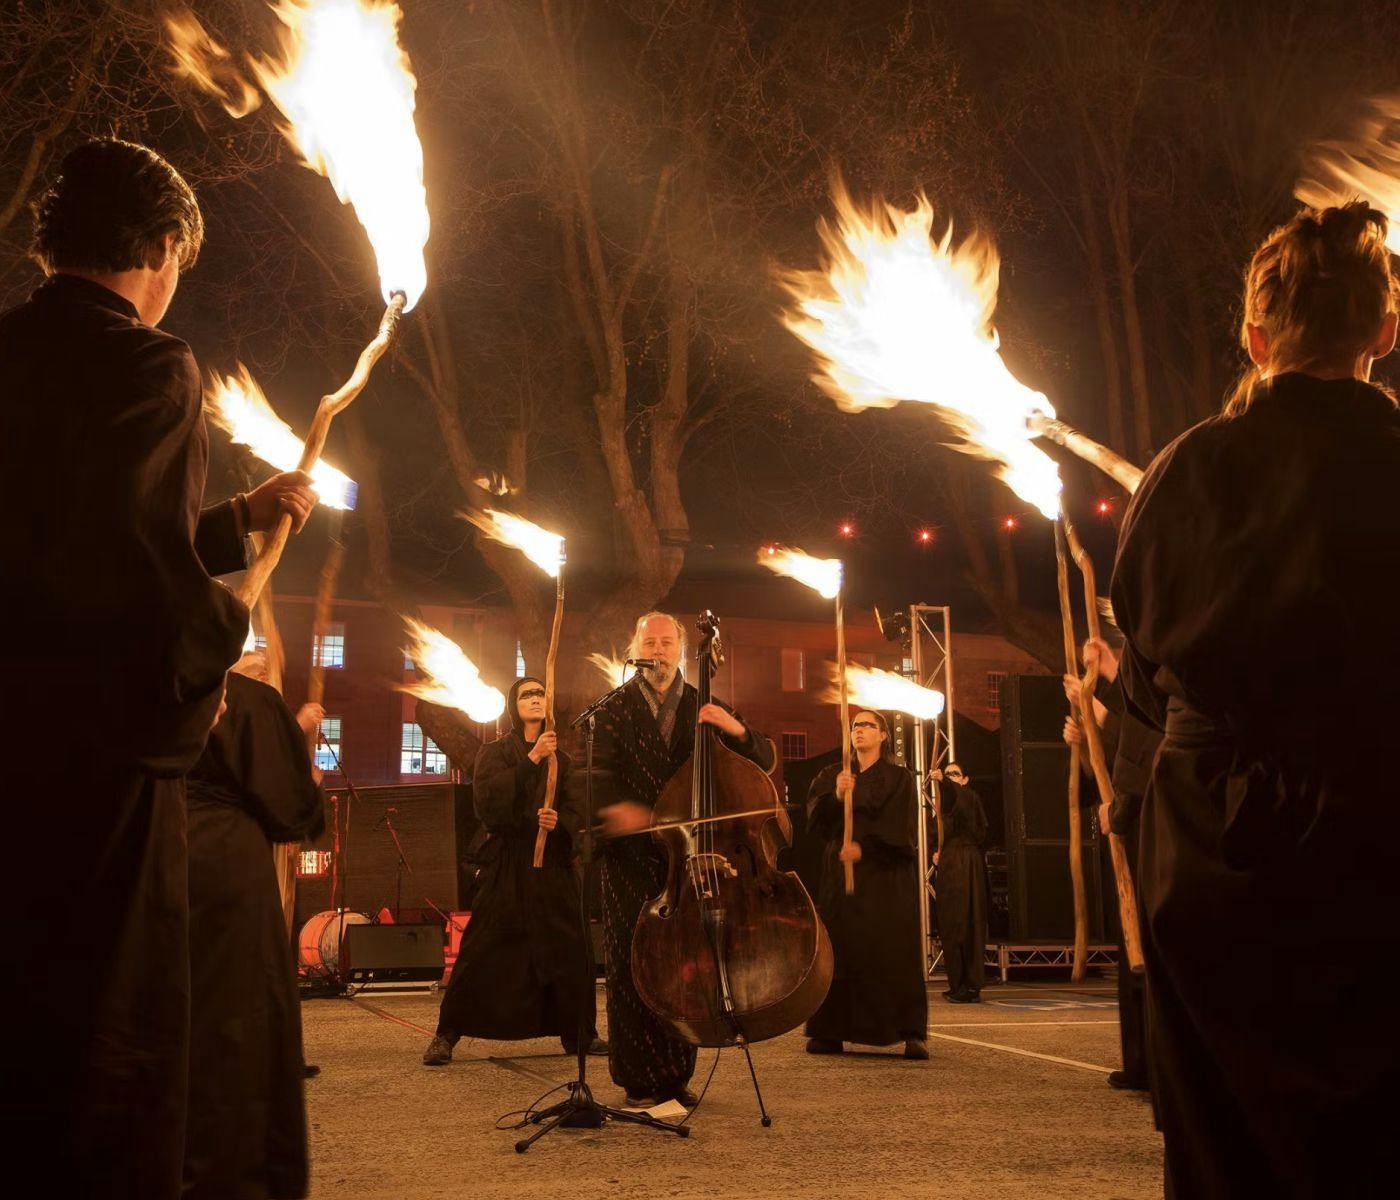 A person plays a cello, surrounding them are several black-robed people holding flaming sticks.